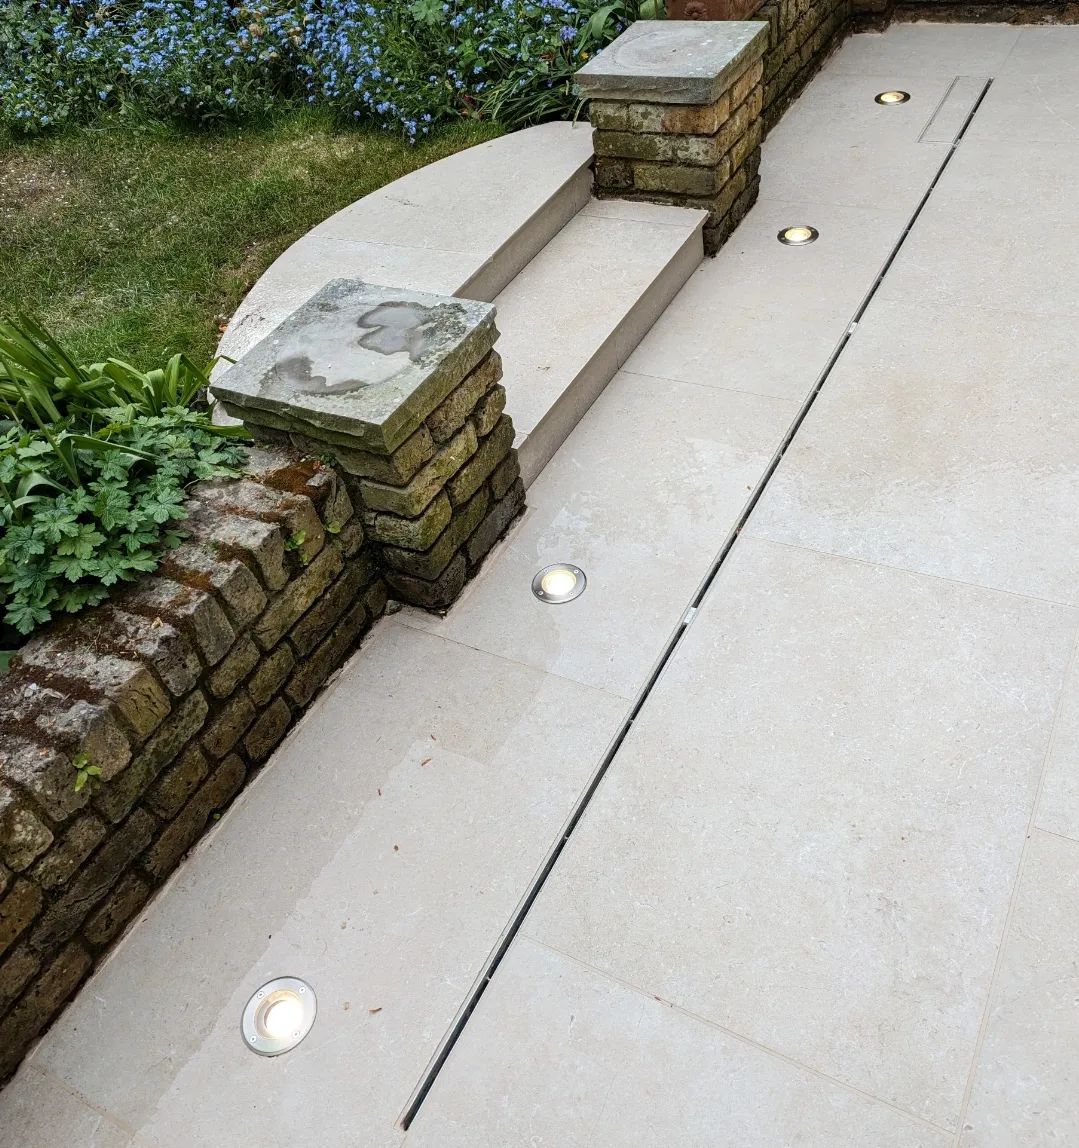 Paved garden with drain